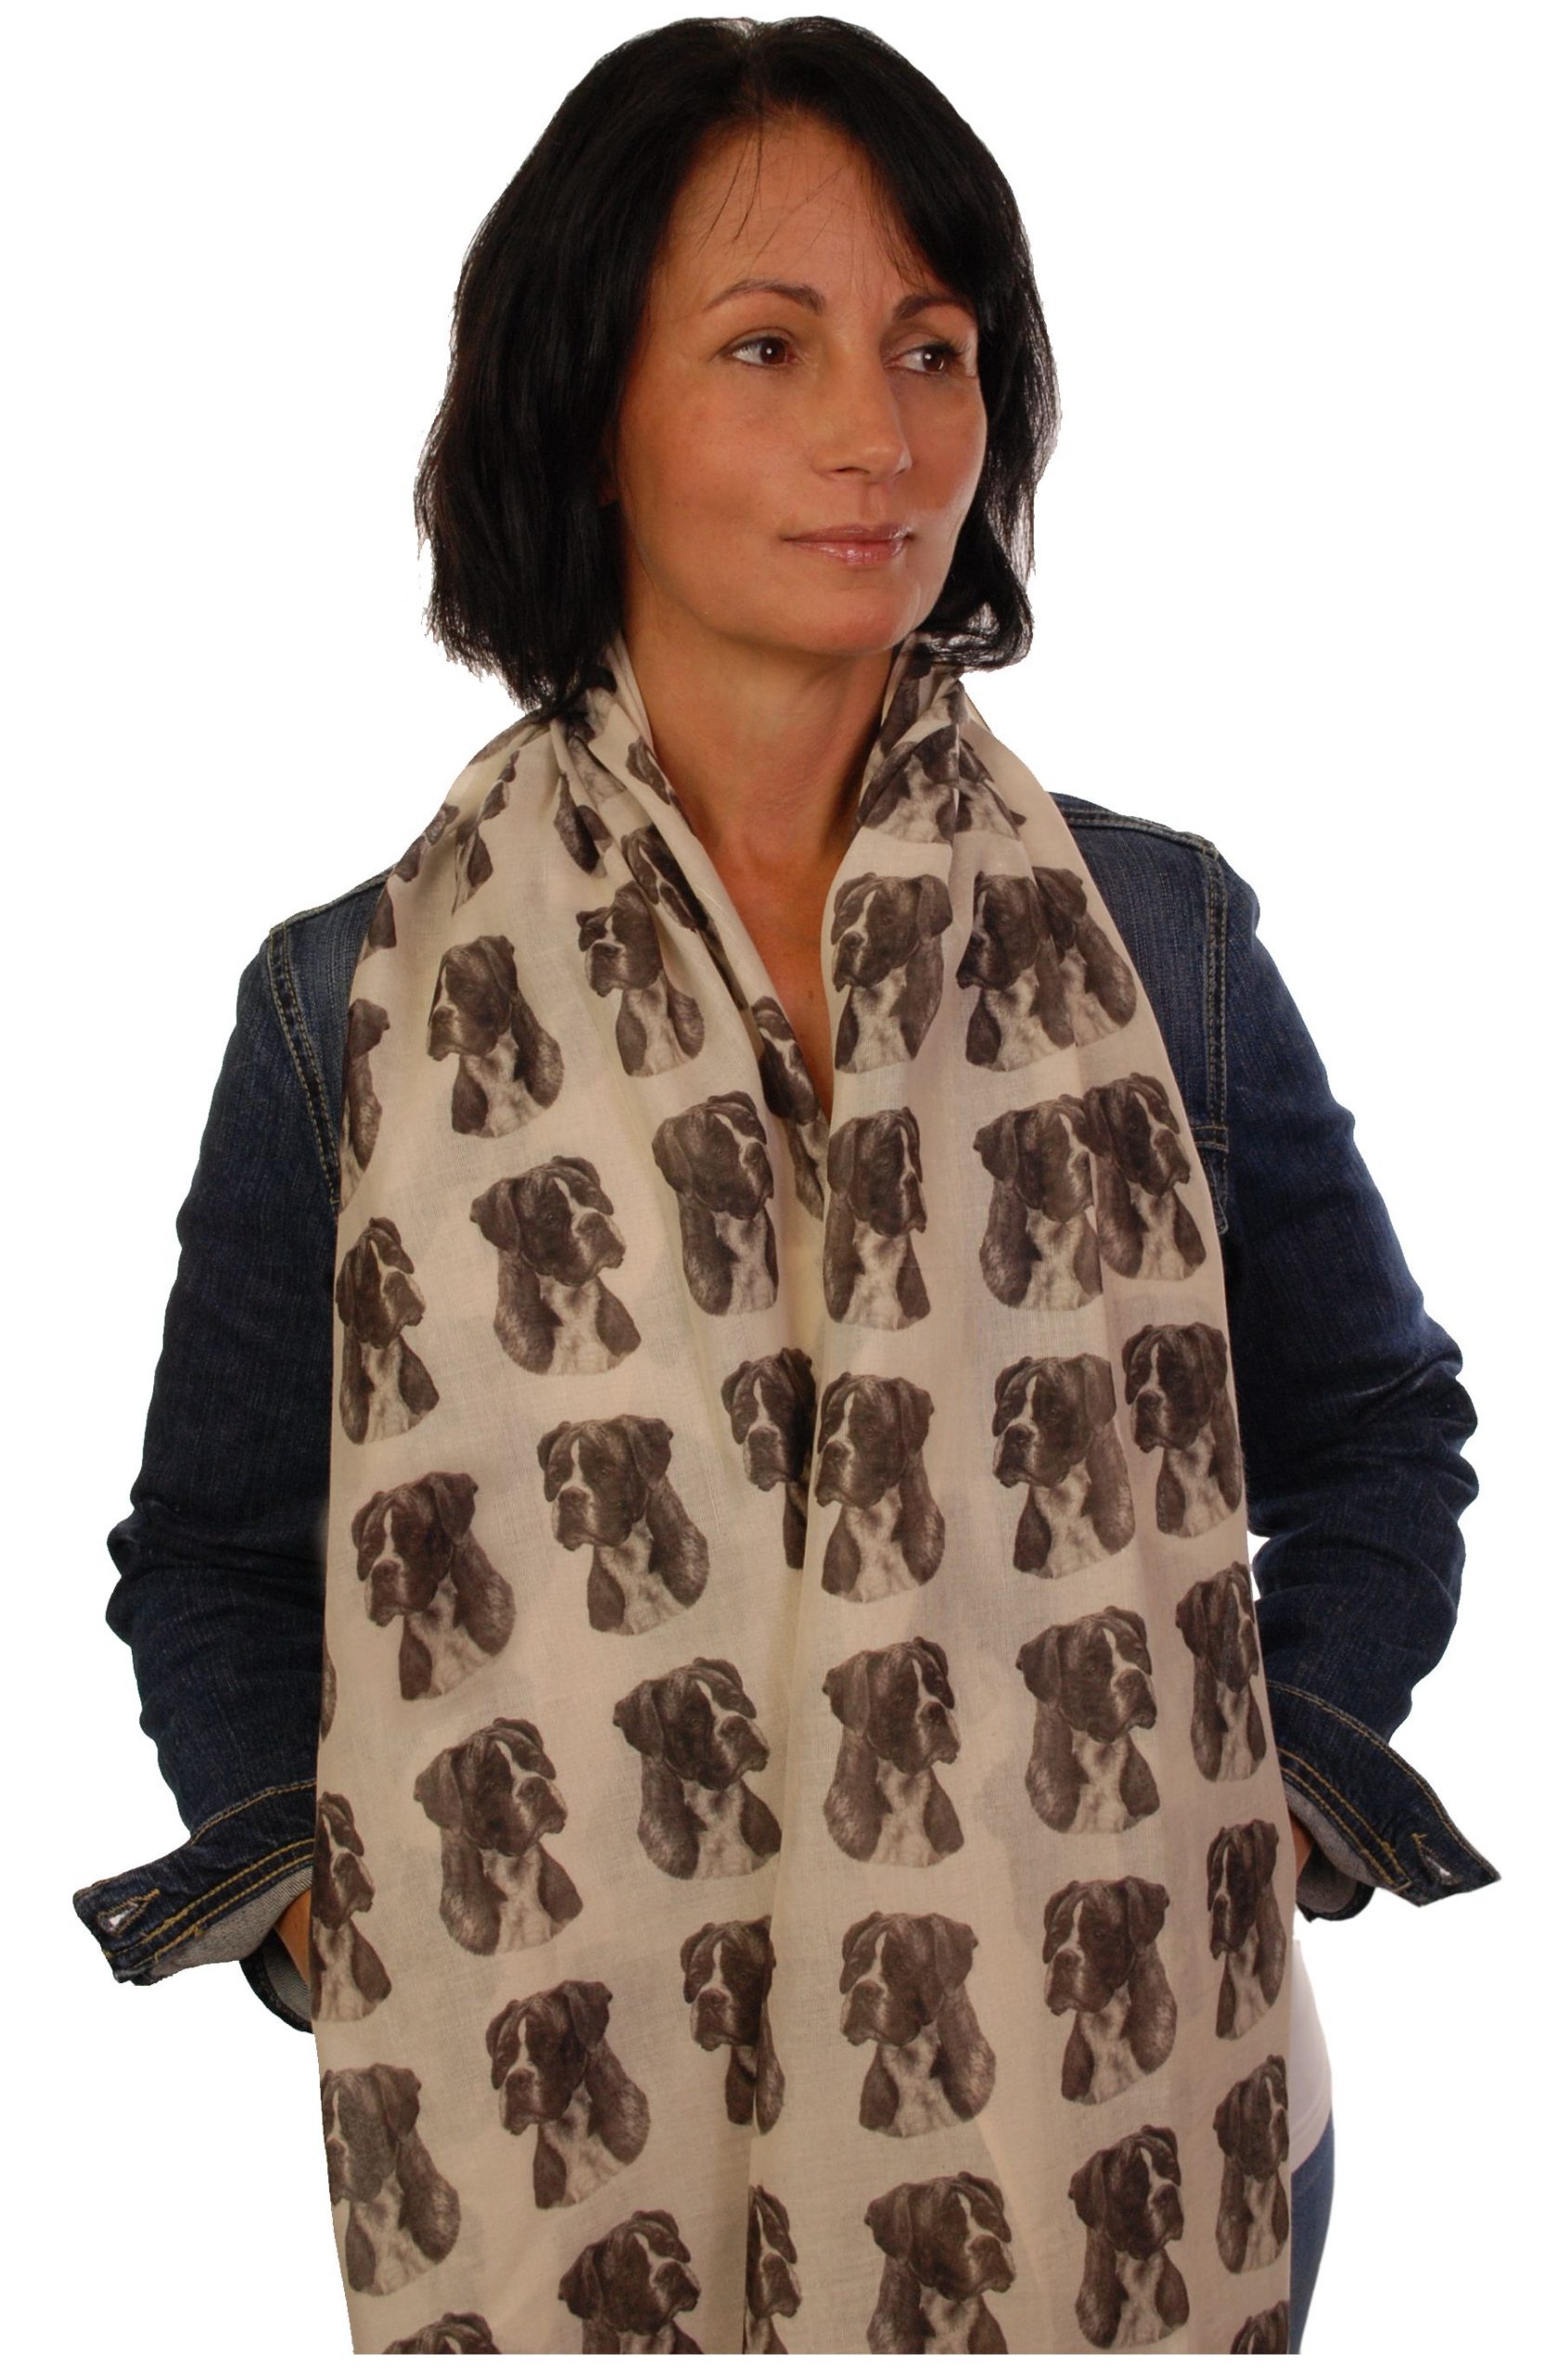 Mike Sibley Boxer licensed design ladies fashion scarf